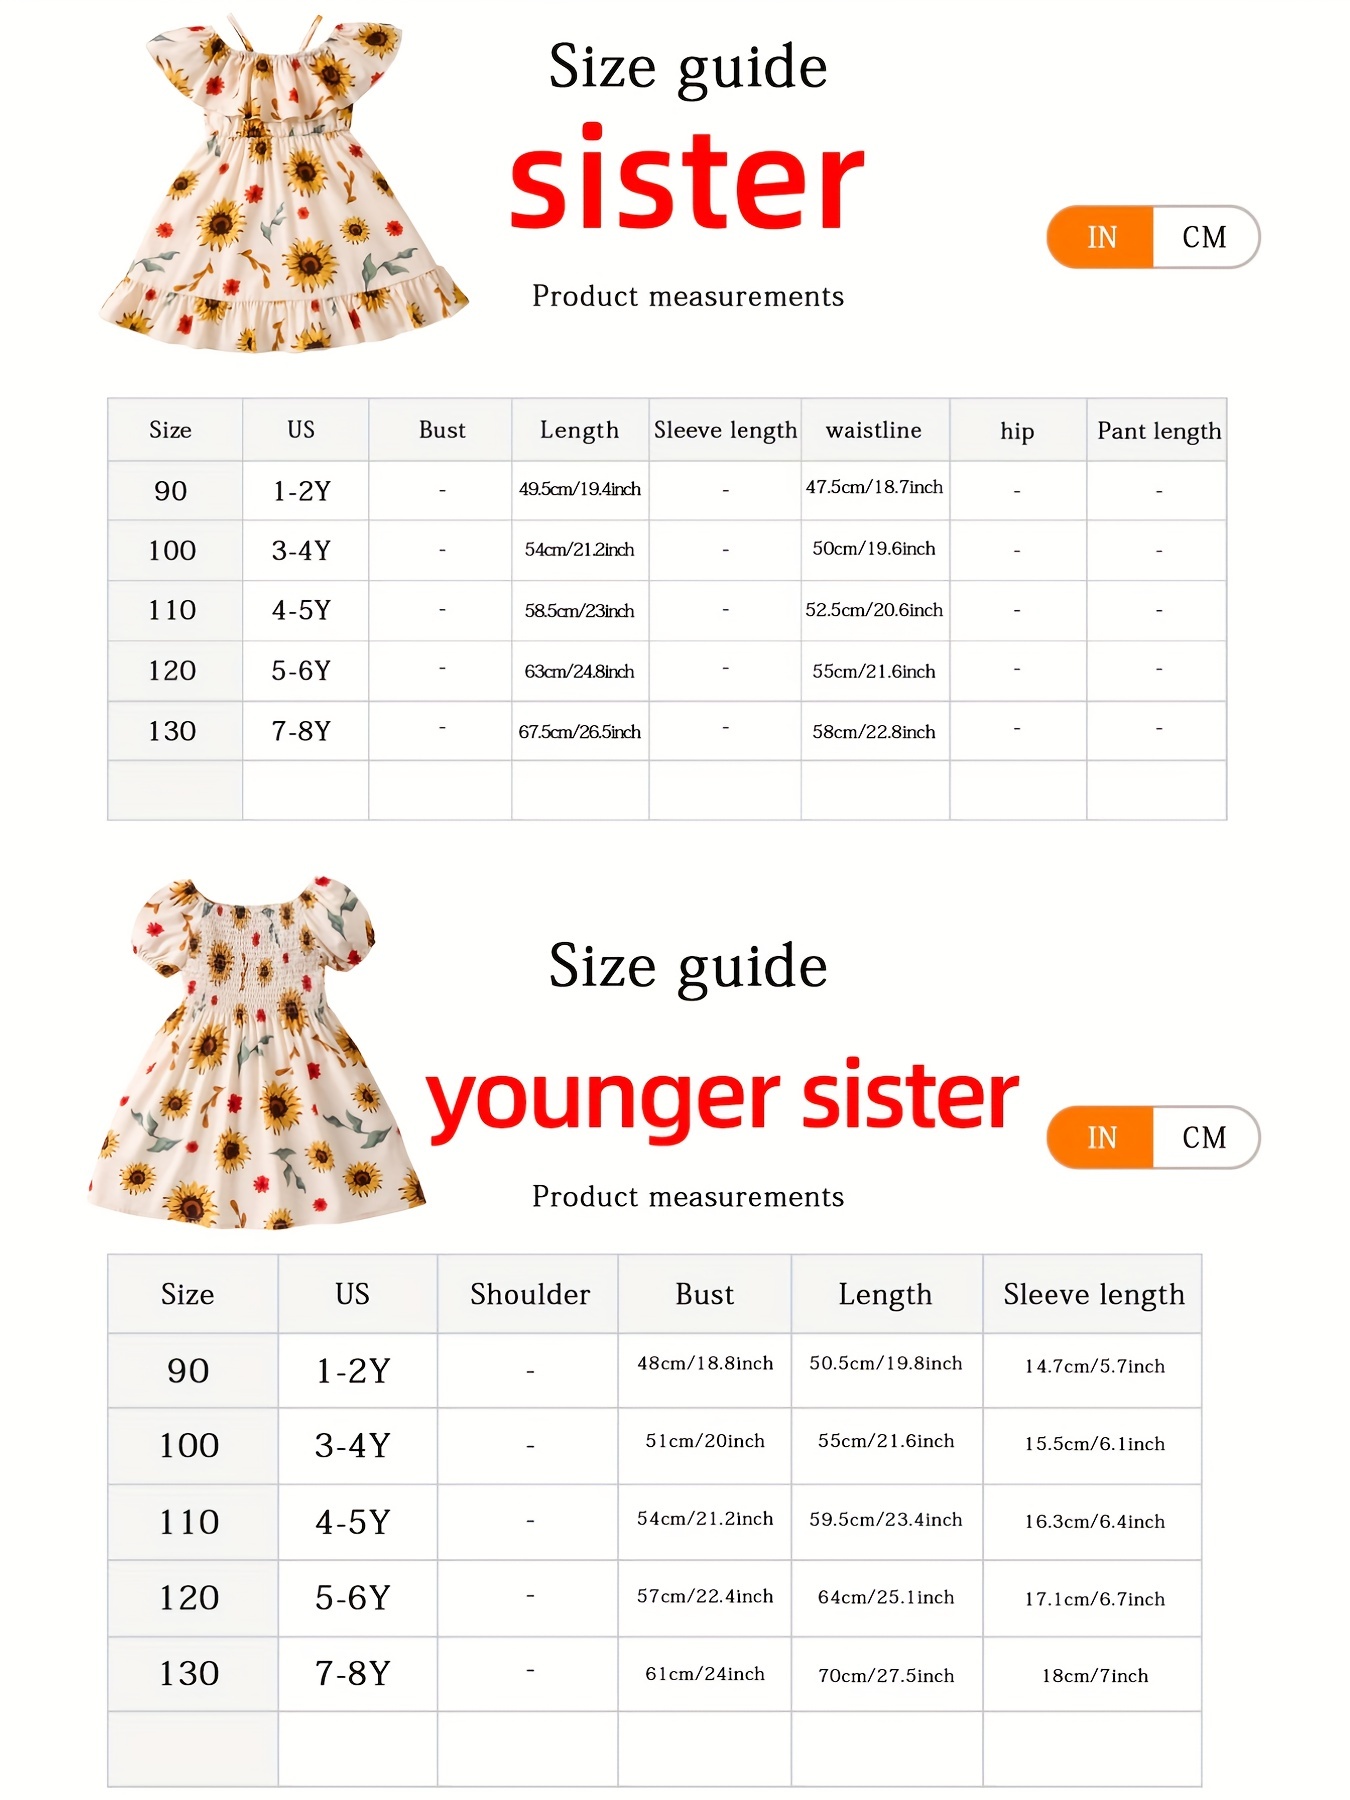 Sister Size Guide